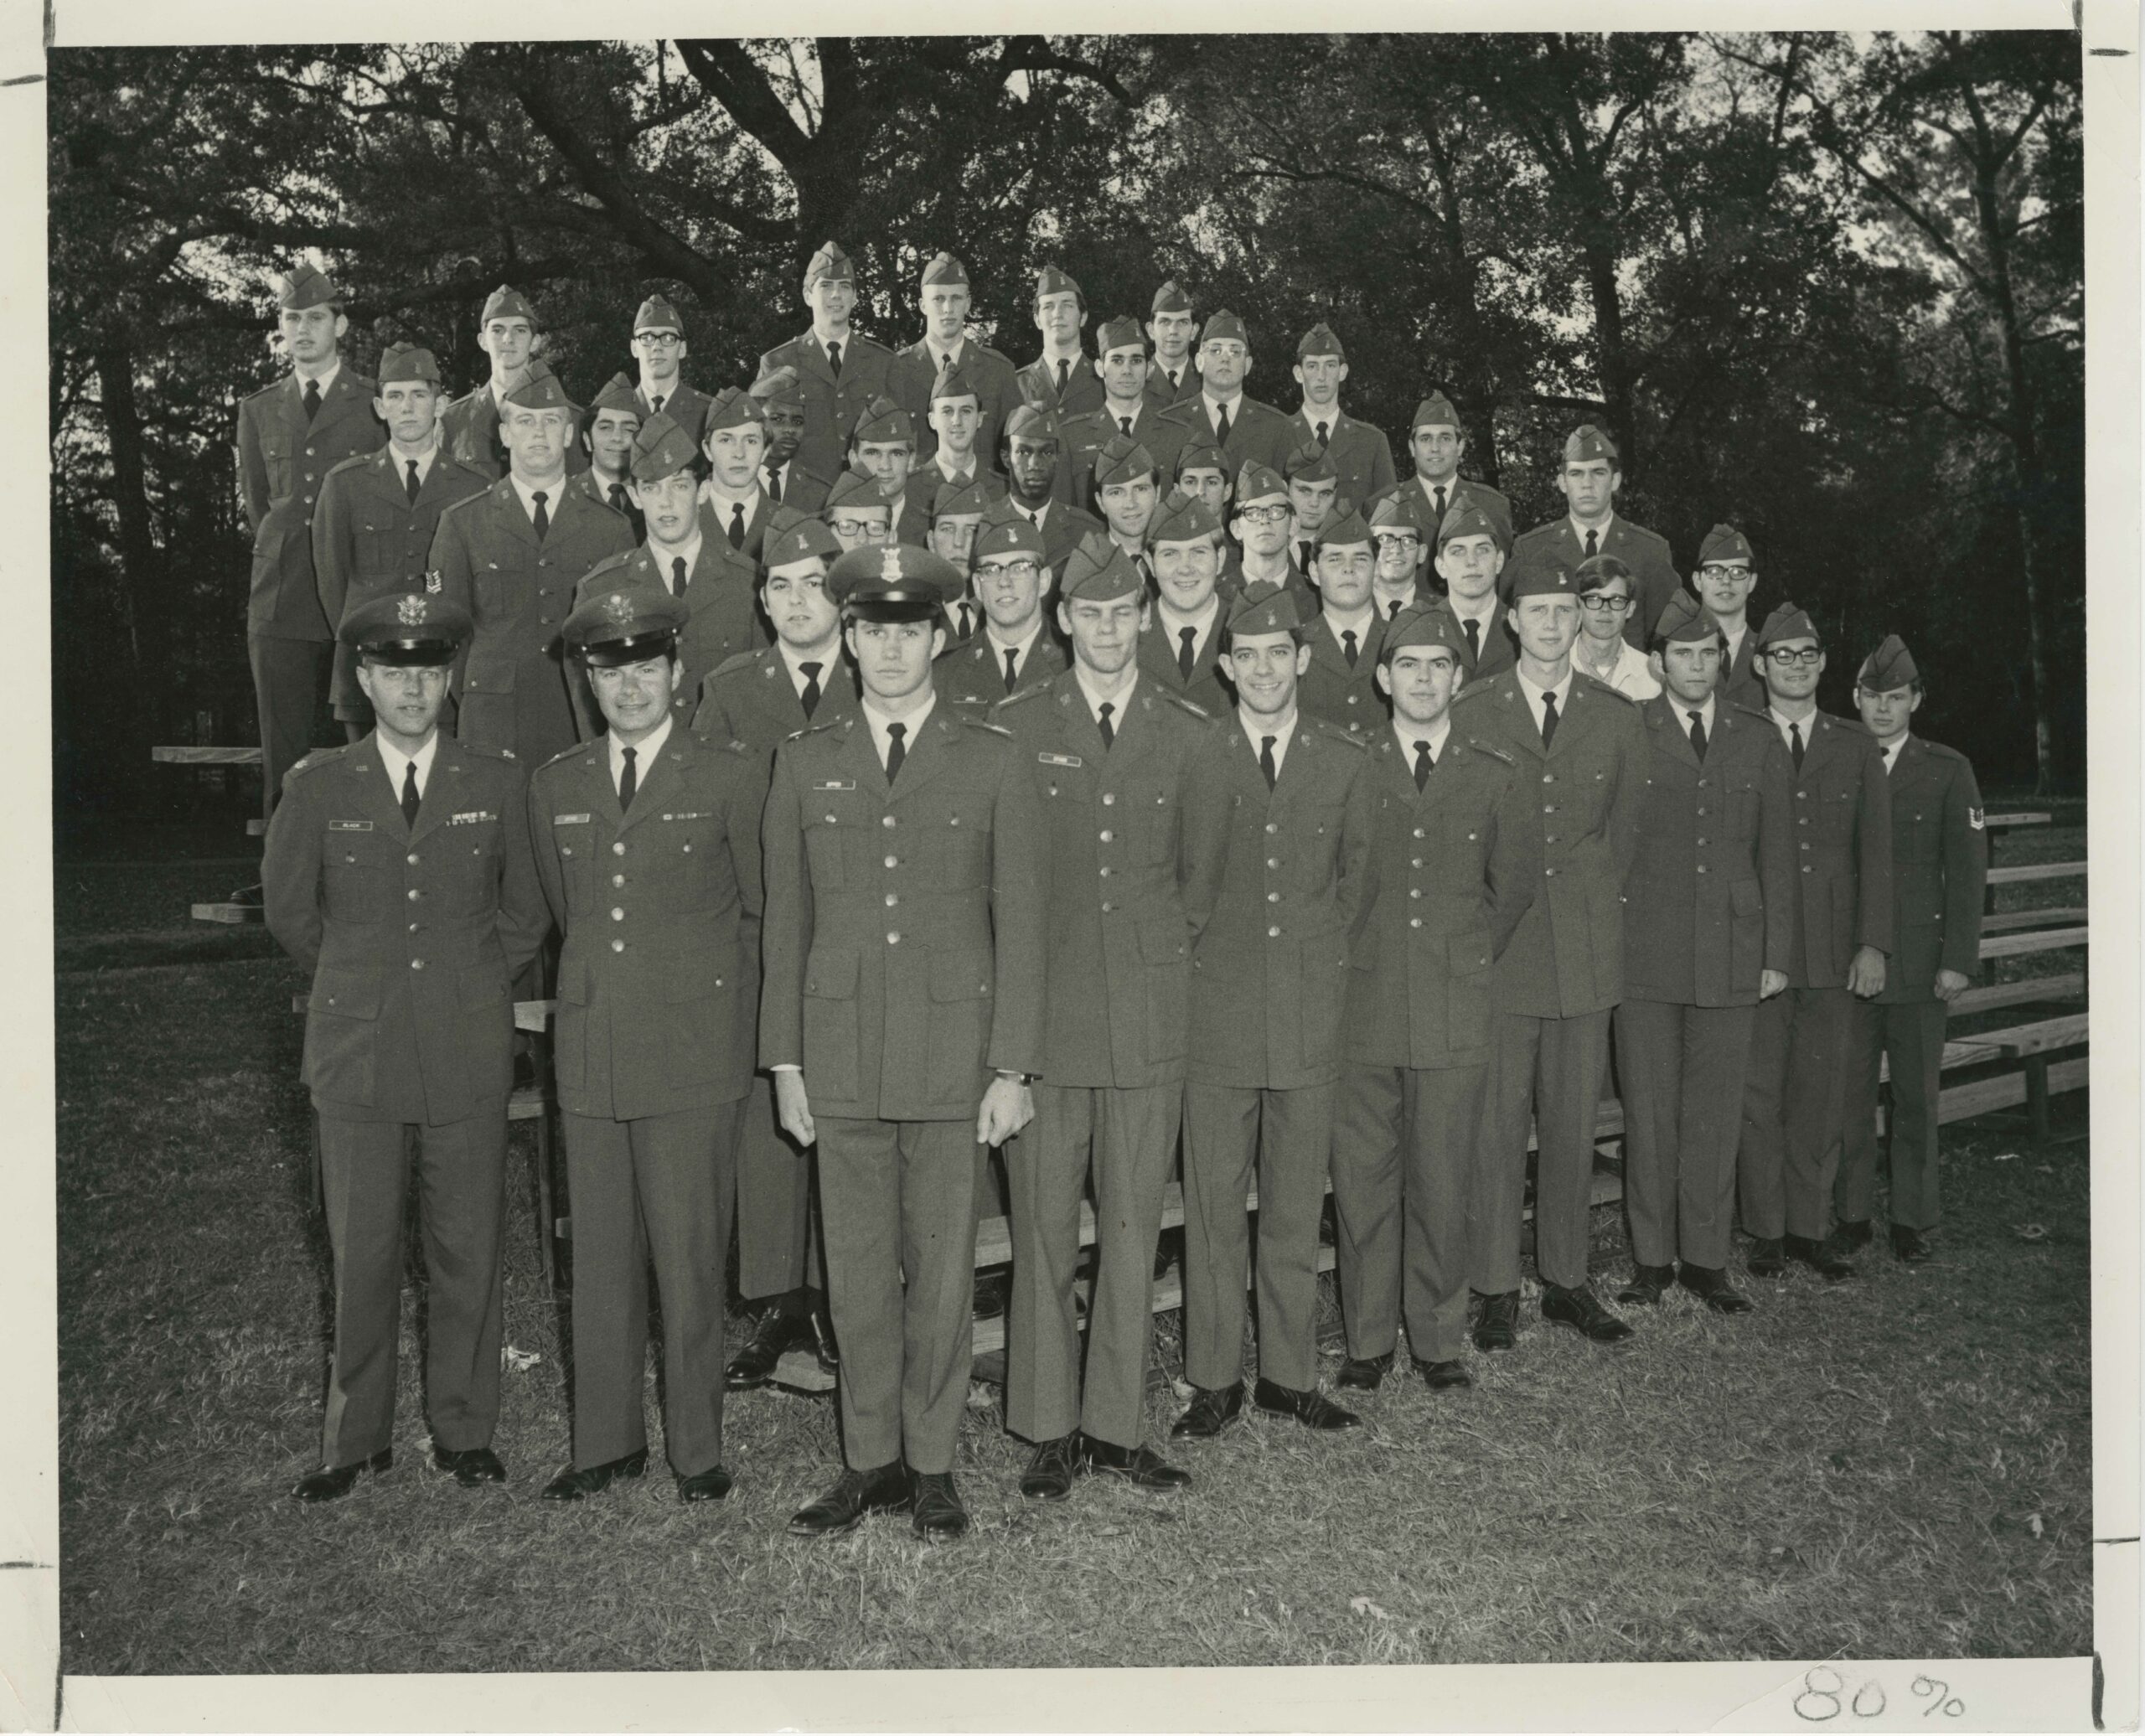 AFROTC at Oxford in 1970